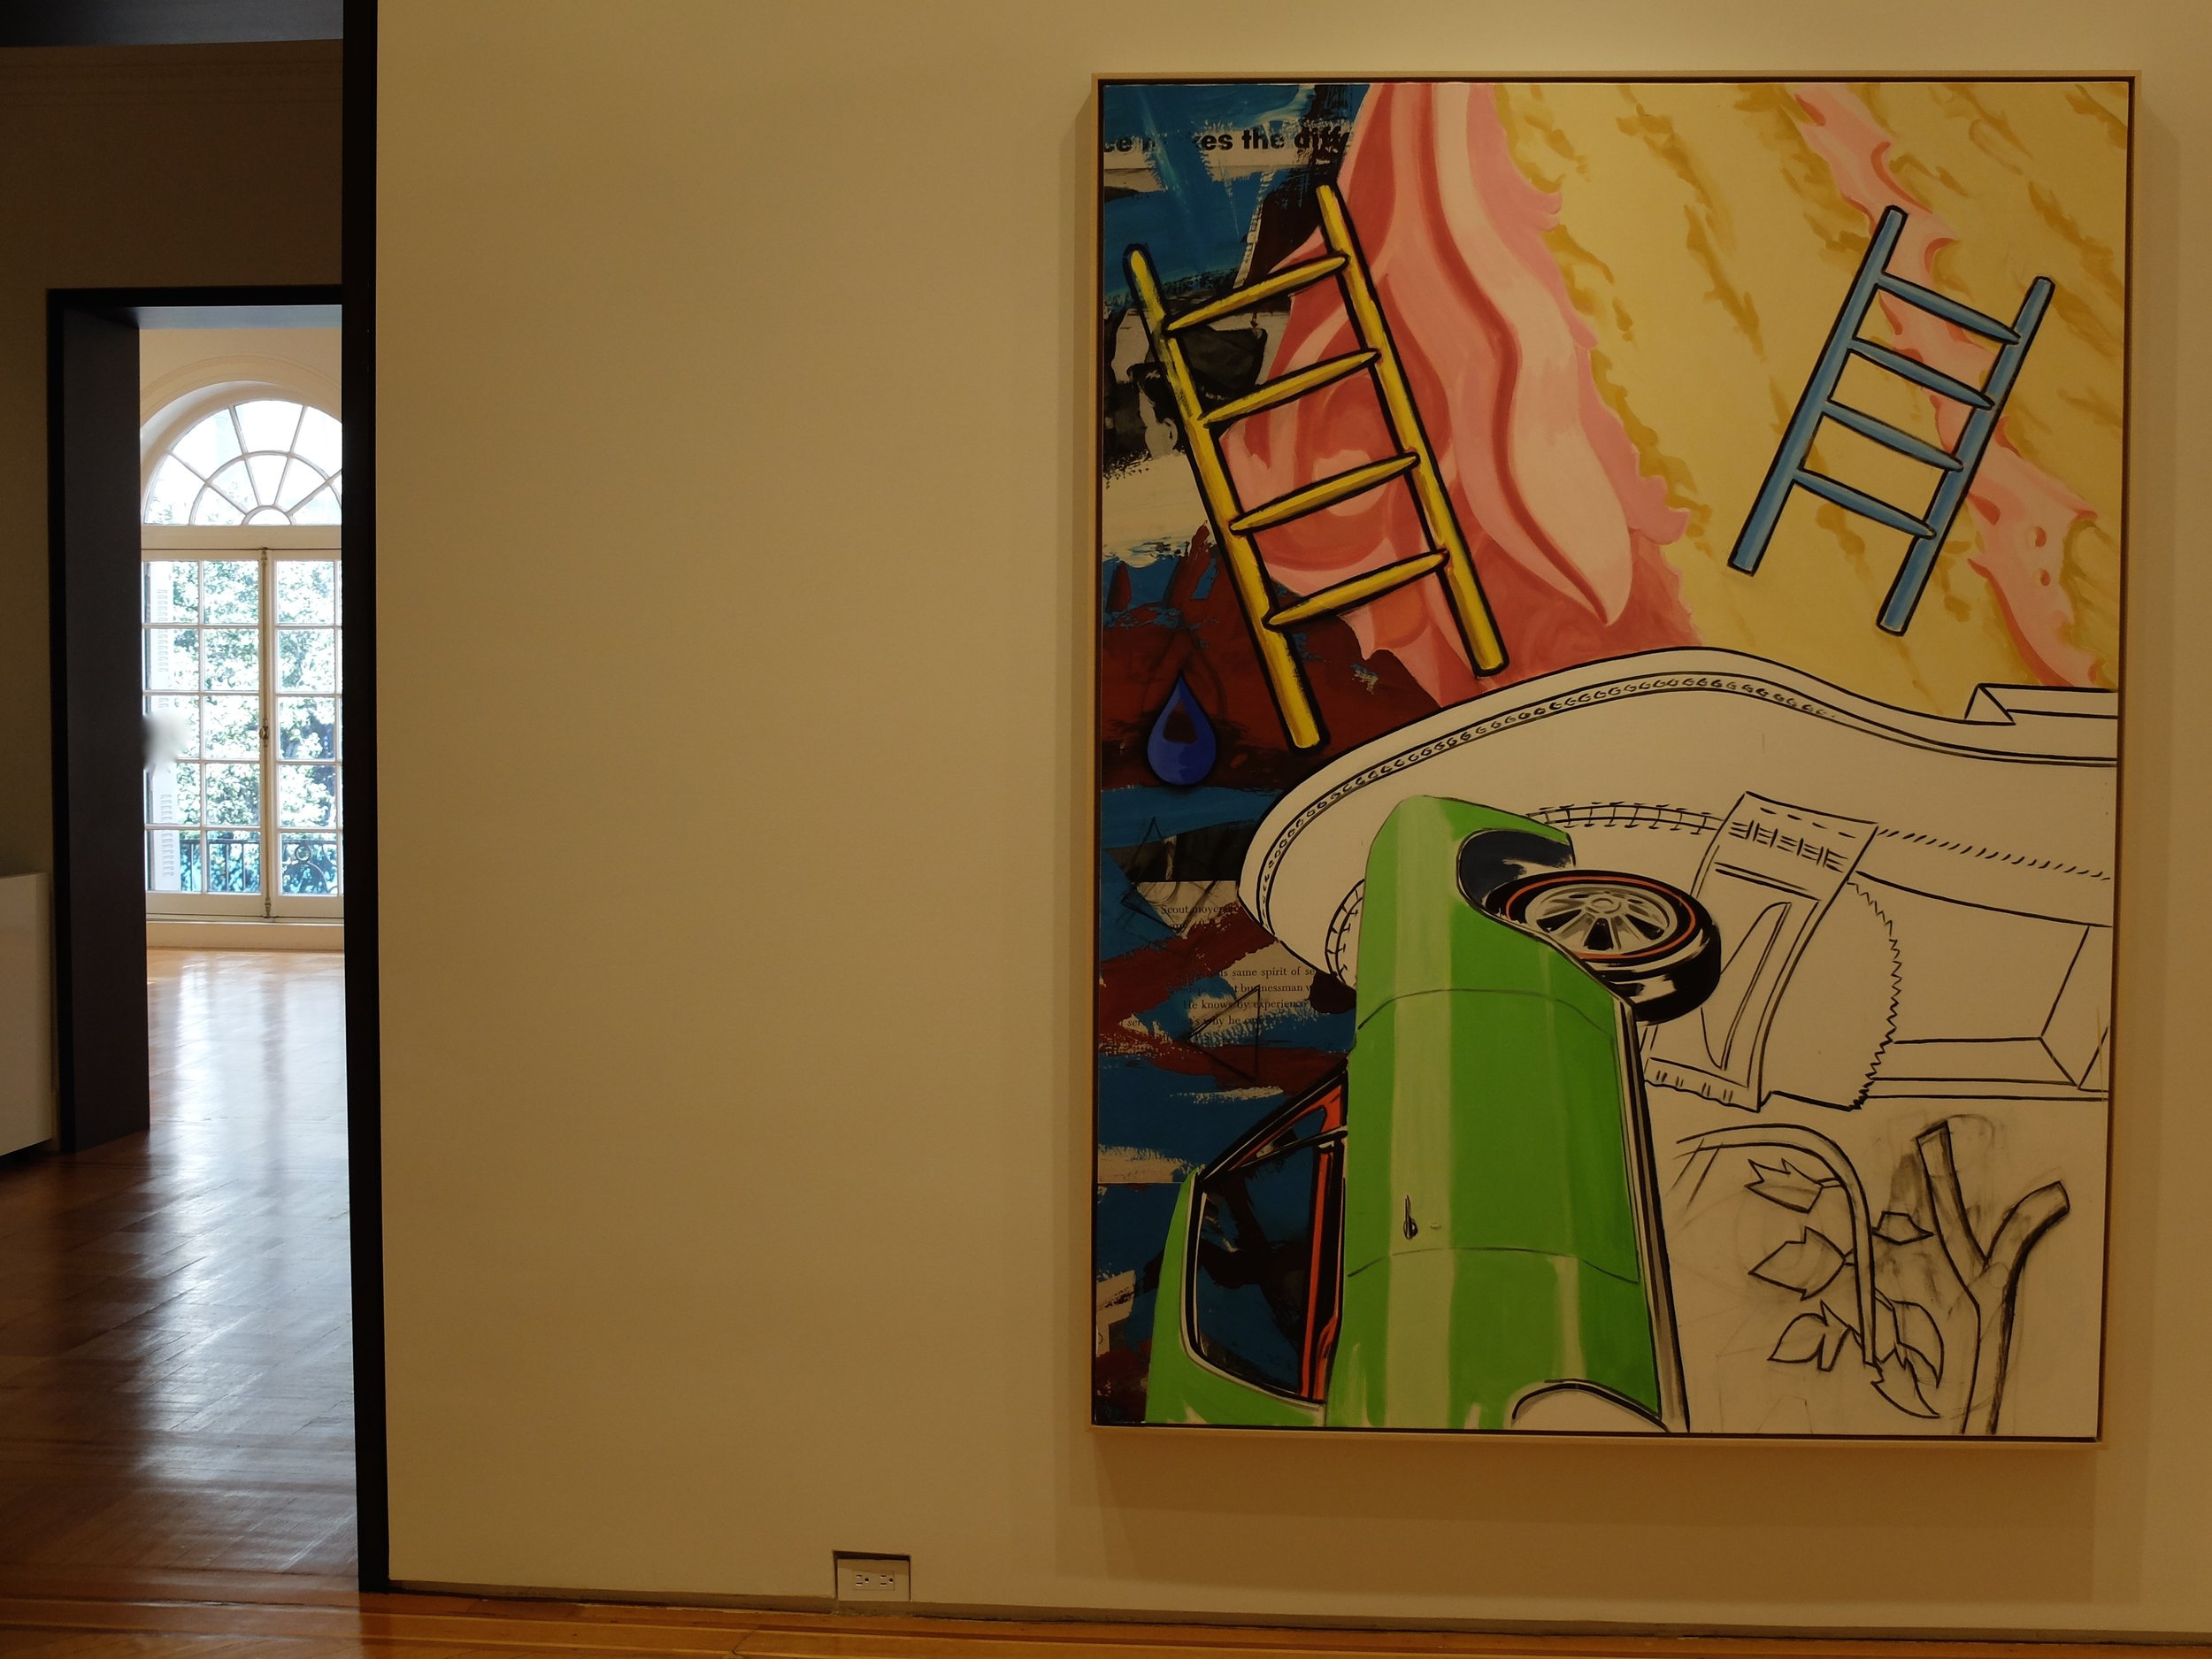 David Salle @ the Skarstedt Gallery - We were impressed by the building space but not the paintings.